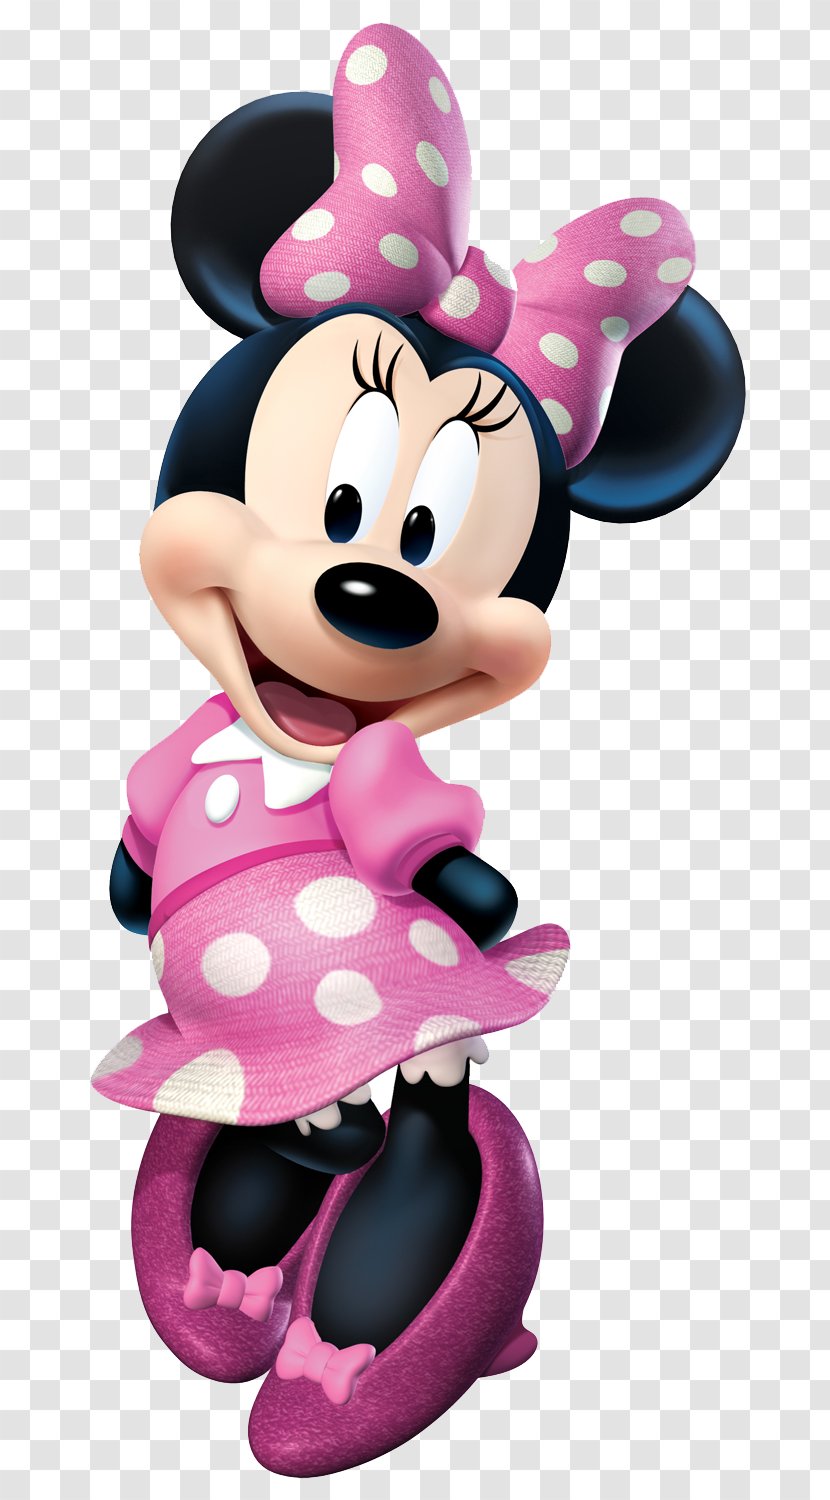 Minnie Mouse Mickey The Gleam Clip Art - Toy - MINNIE Transparent PNG